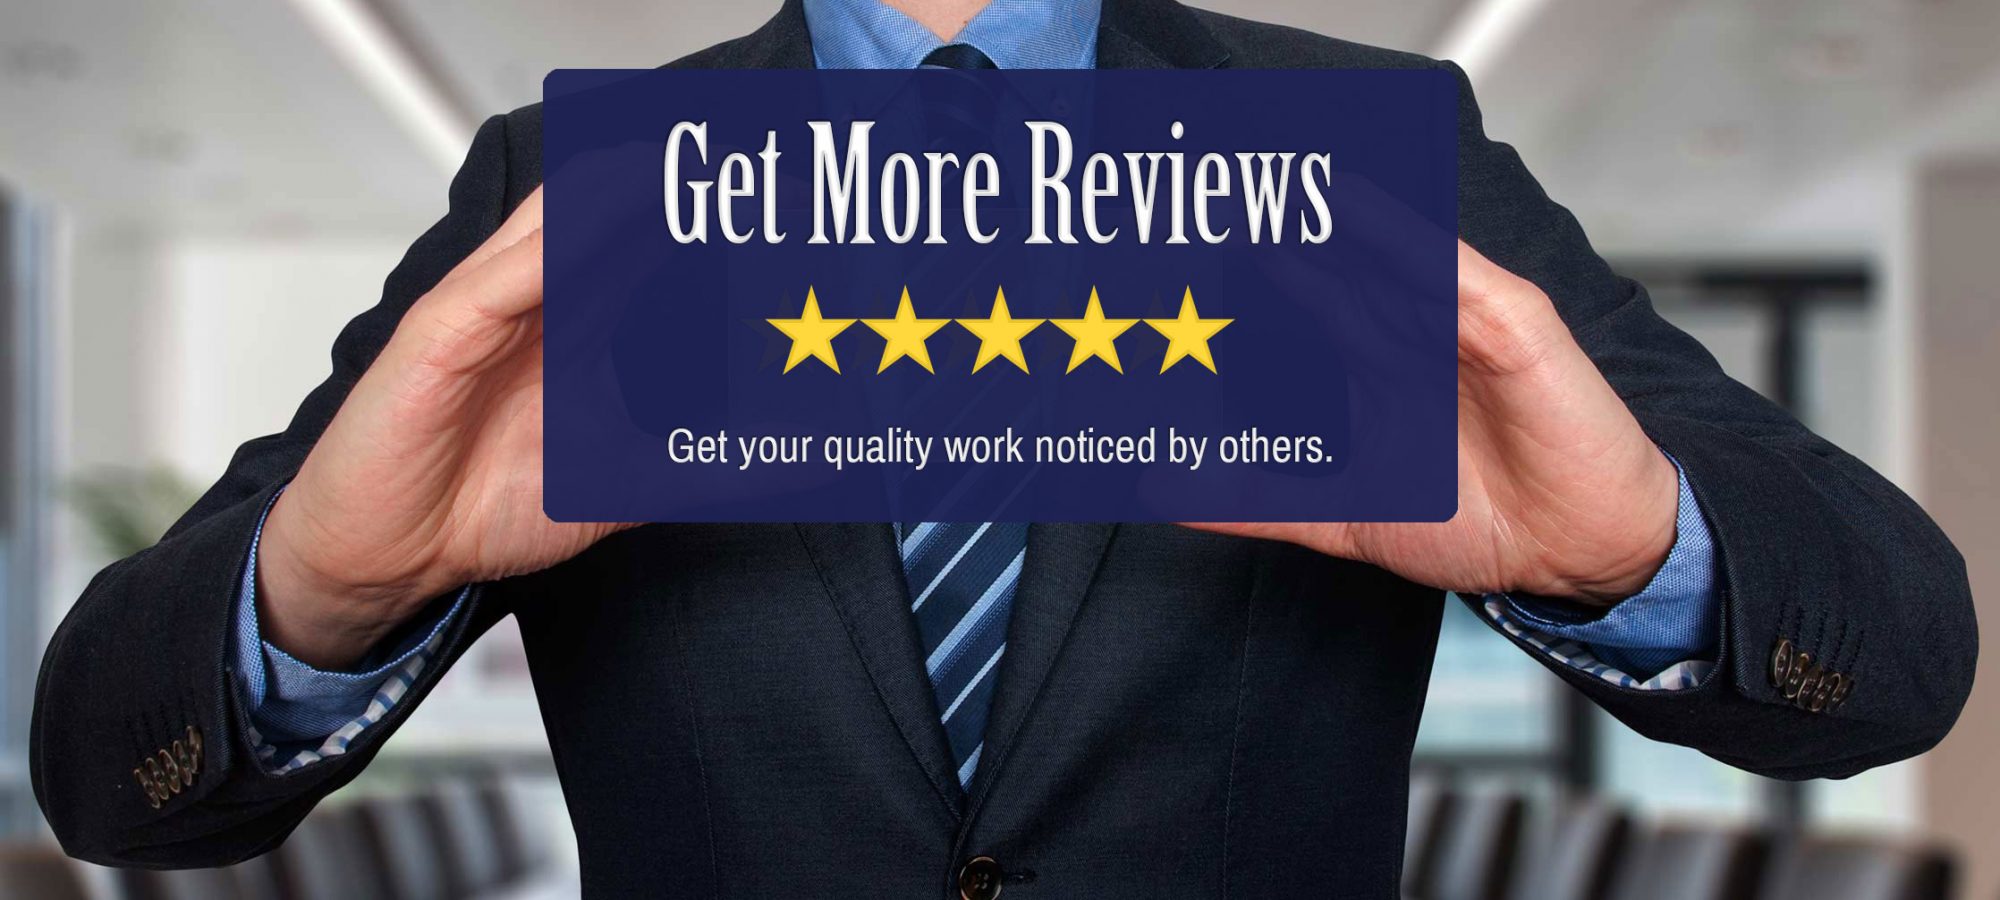 Get More Reviews - Get your quality work noticed by others.